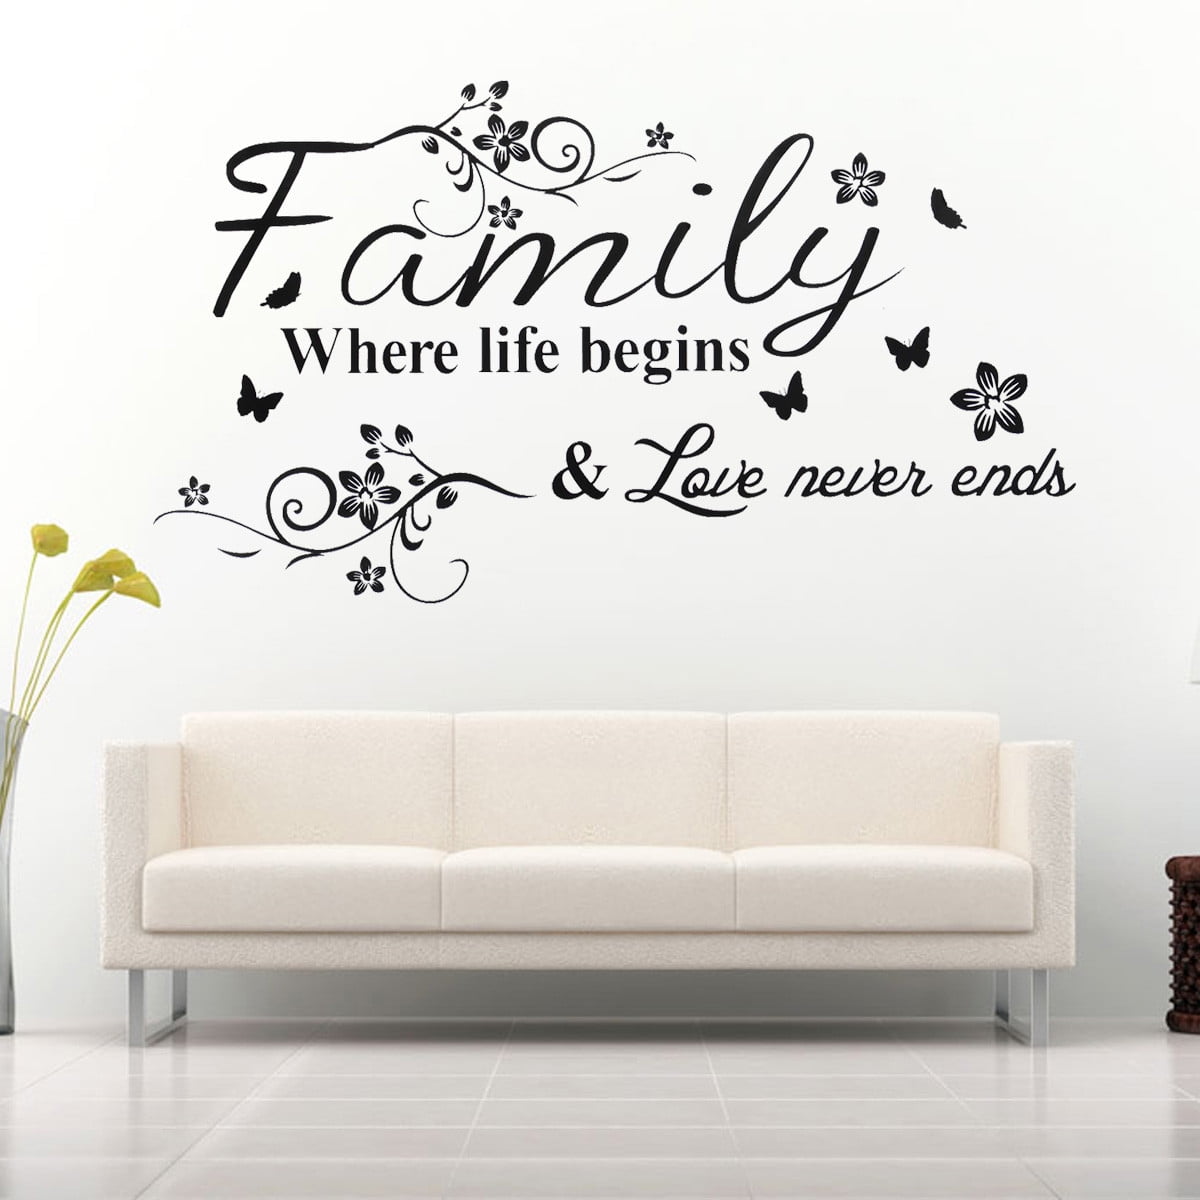 Thank You For Reminding Me Wall Sticker Wall Chick Decal Art Sticker Quote 